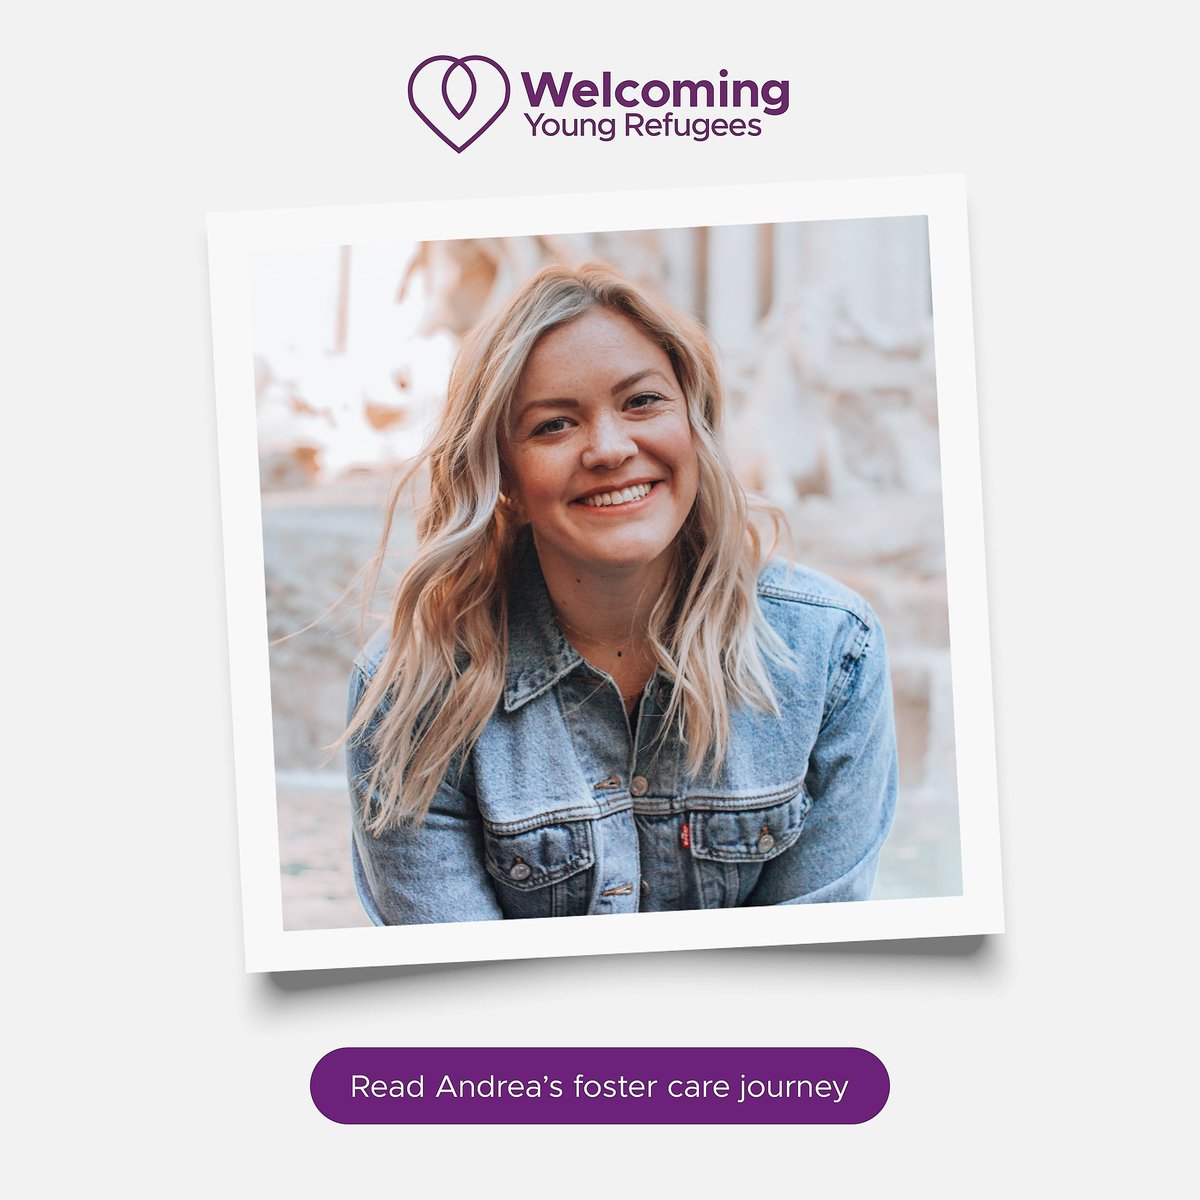 Andrea shares her experience of becoming a foster carer. orlo.uk/tdFnk #fostercare #yorkshire #MakingADifference #Fostering #WelcomingYoungRefugees #MigrationYorkshire